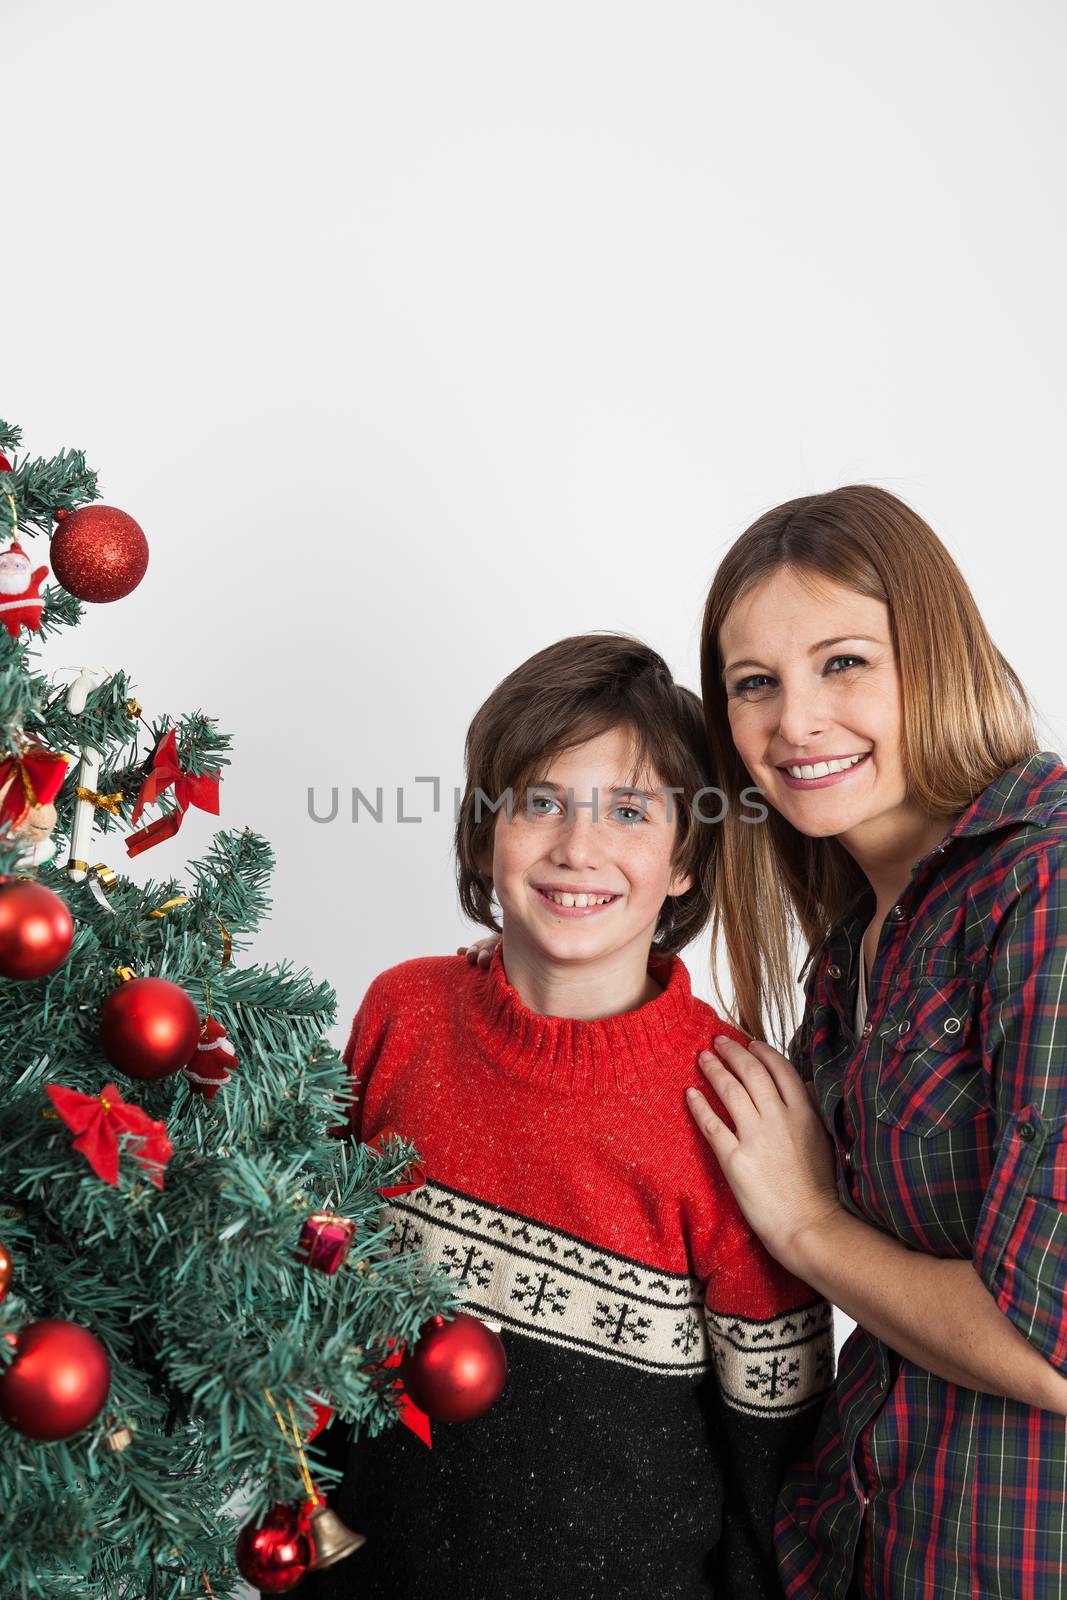 10-12, 30-35, adult, background, balls, boy, caucasian, celebration, christmas, claus, decorating, decoration, decorations, family, female, festive, fun, garland, green, hand, happy, holiday, home, kid, love, model, mom, mother, old, ornament, ornaments, person, present, property, red, releases, santa, seasonal, son, teen, teenager, tradition, tree, vertical, woman, x-mas, years, young, look, looking, camera, smile, smiling